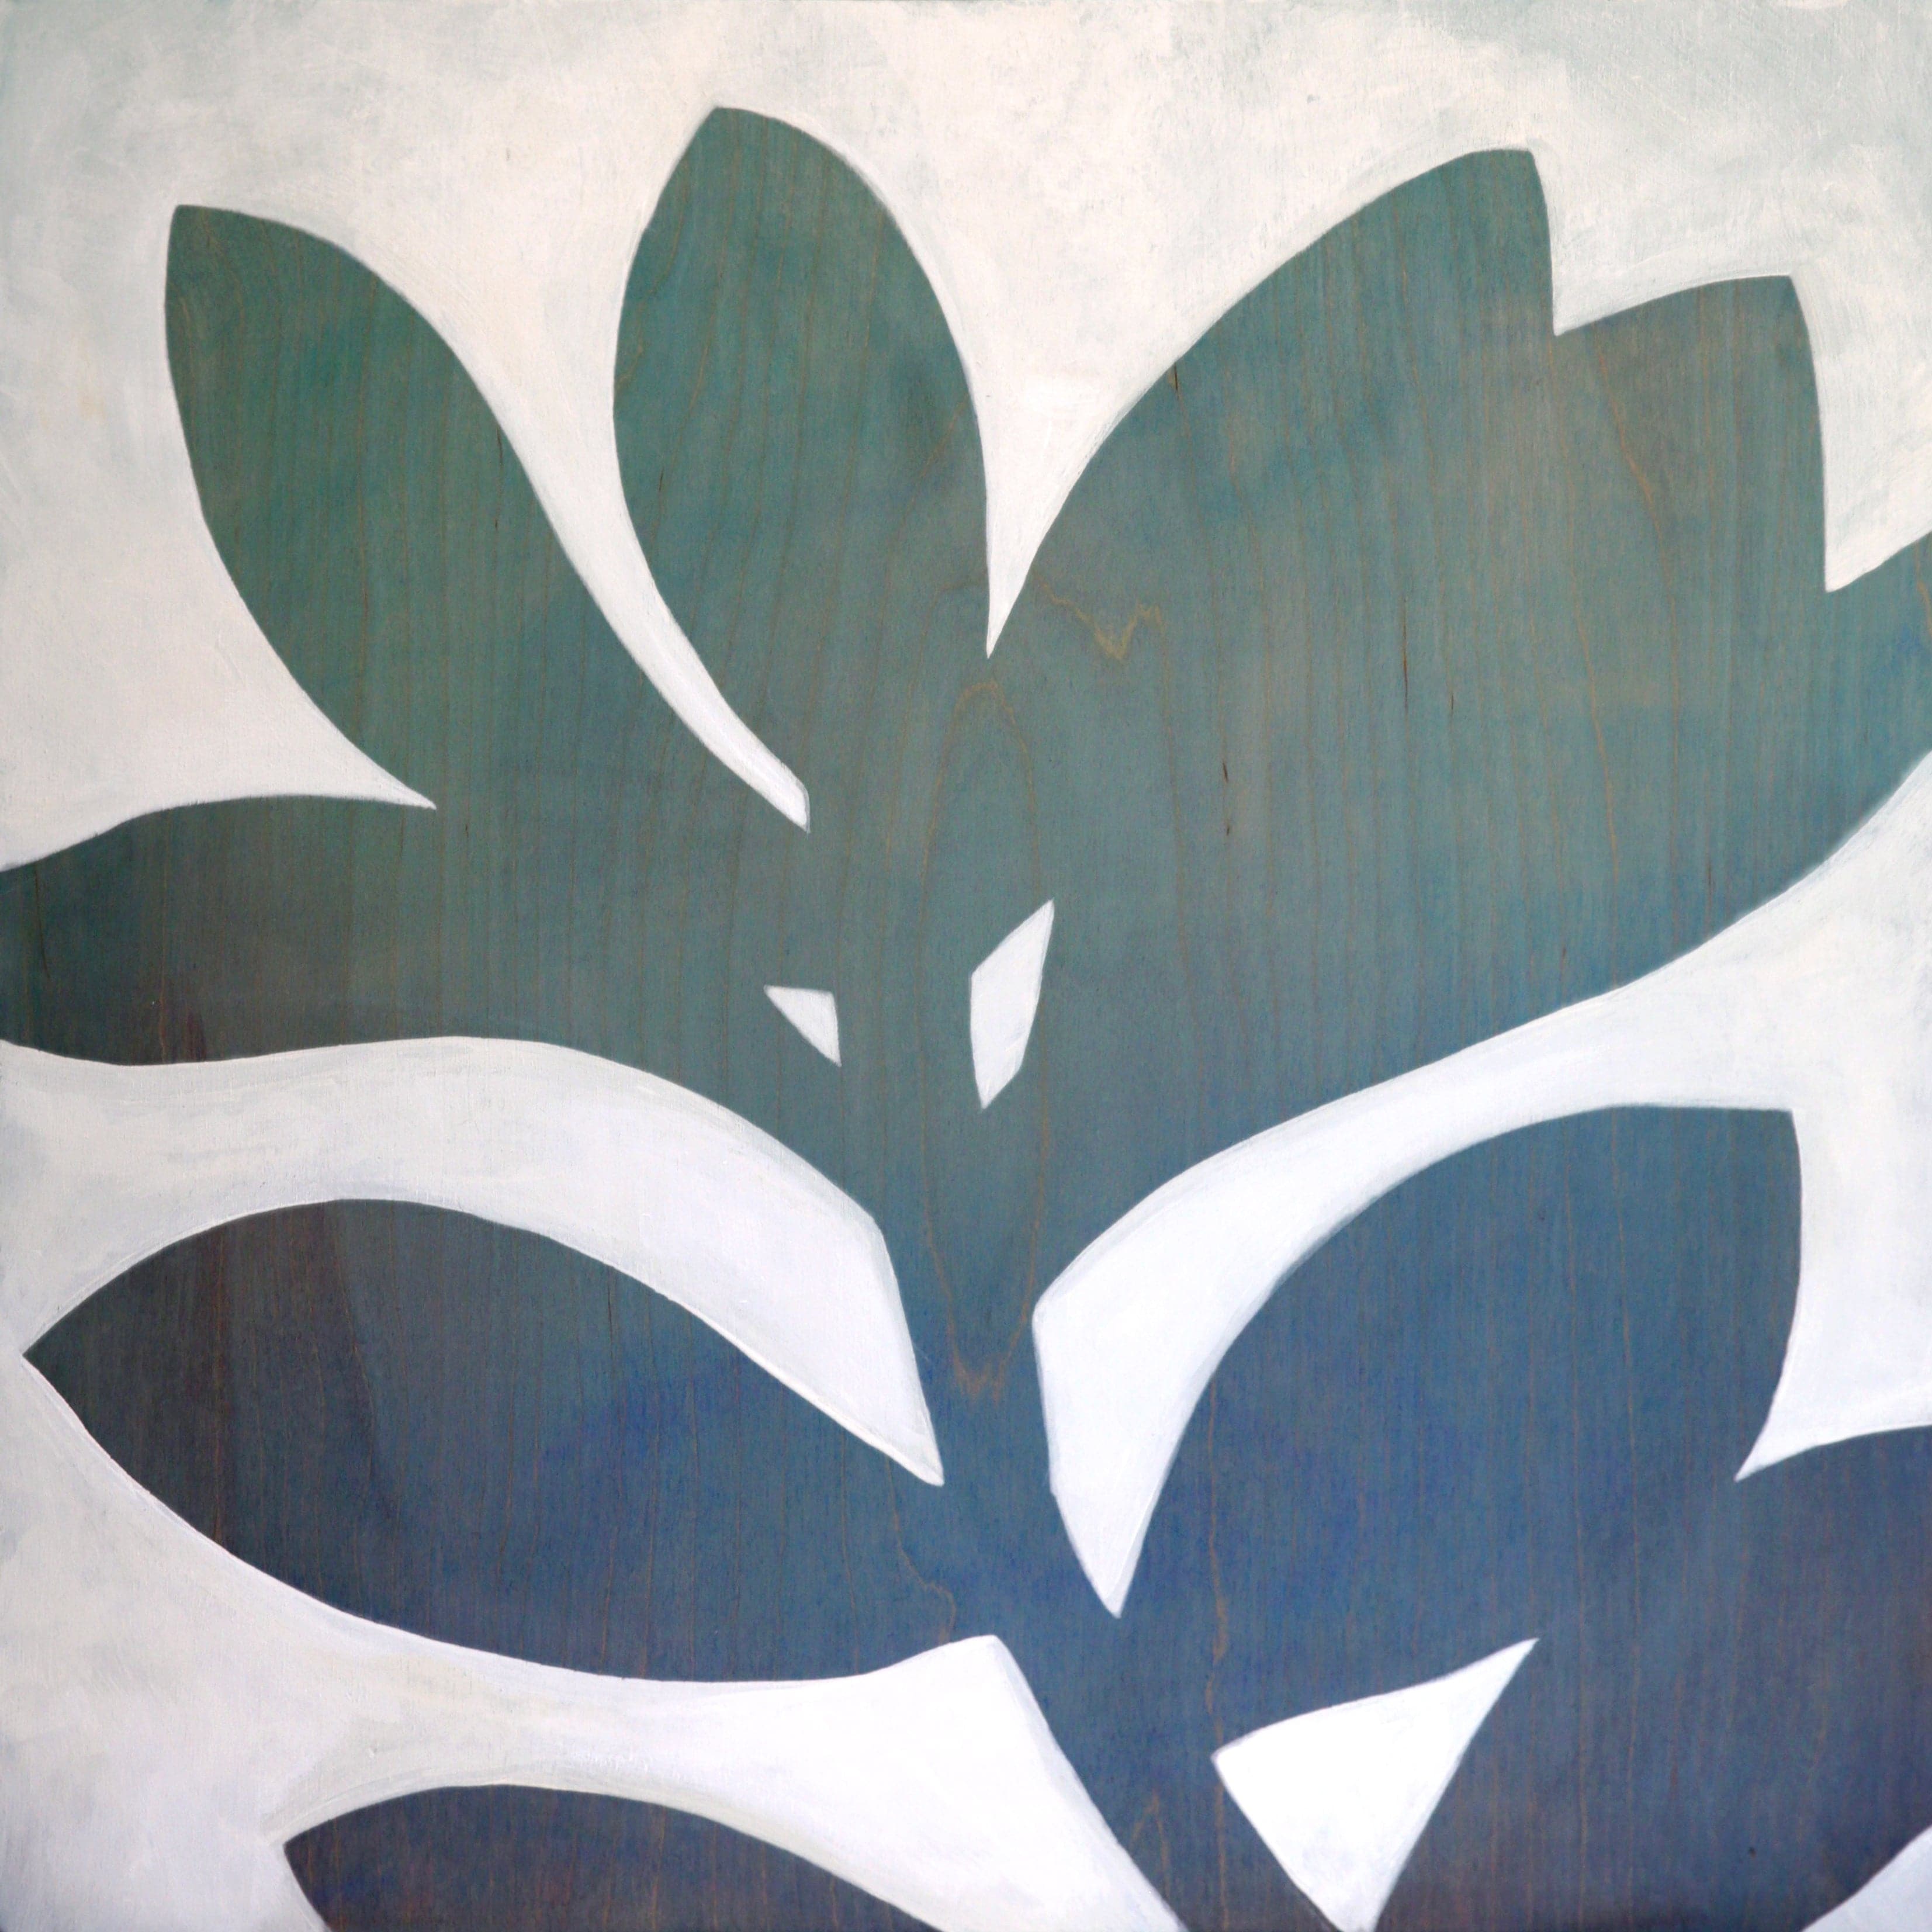 Original painting of a silhouetted blue jade plant in turquoise and navy blue ombre colors and wood grain texture.